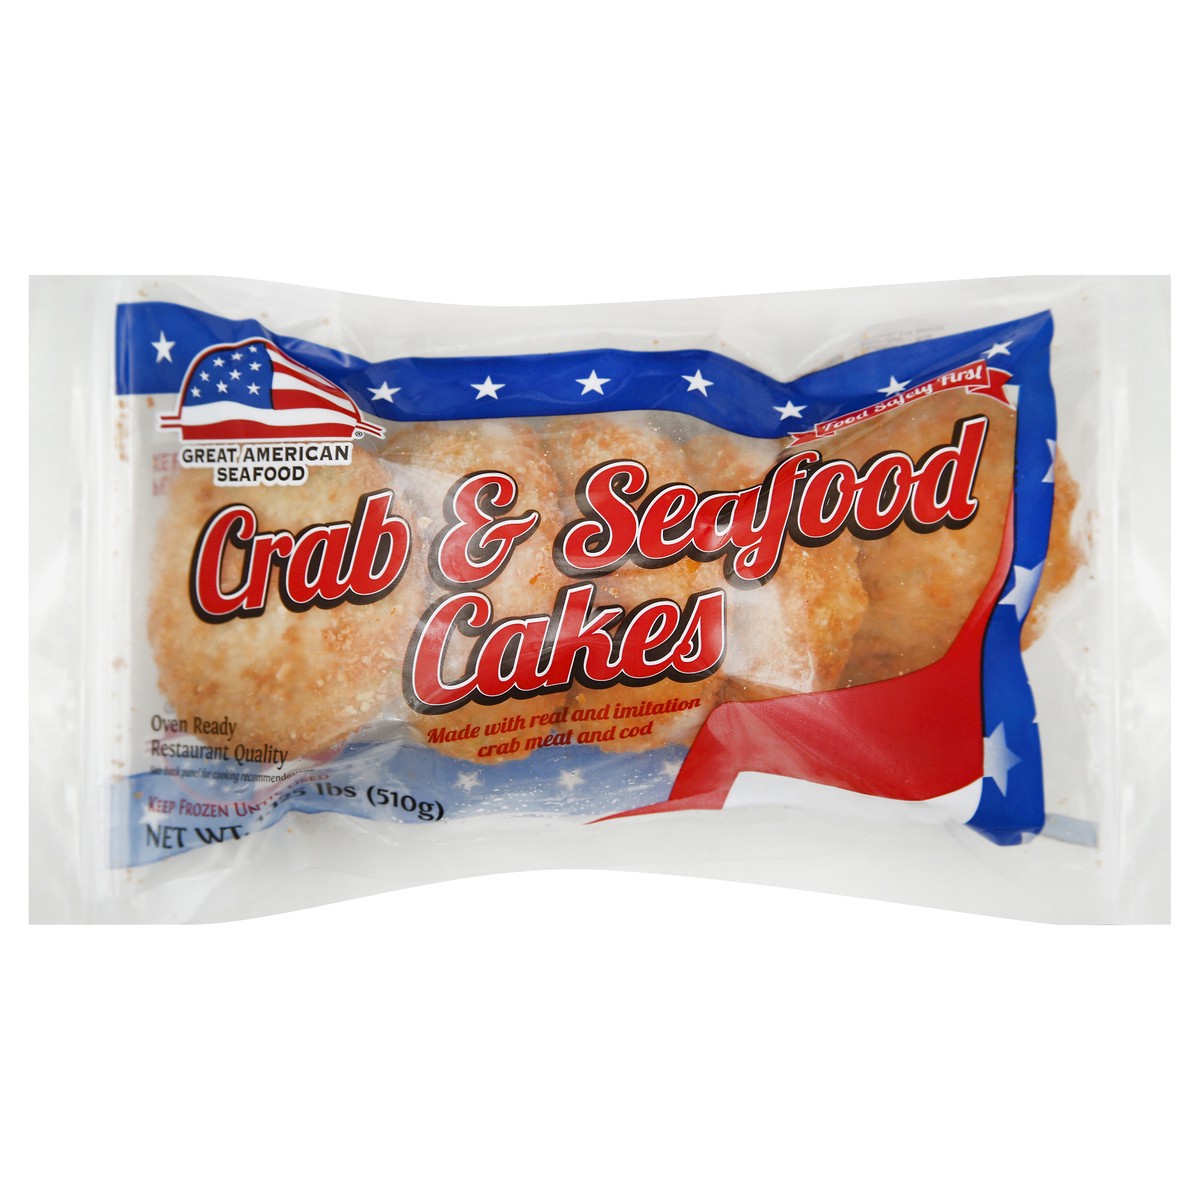 slide 4 of 6, Great American Seafood Crab & Seafood Cakes 1.125 lb, 1.12 lb